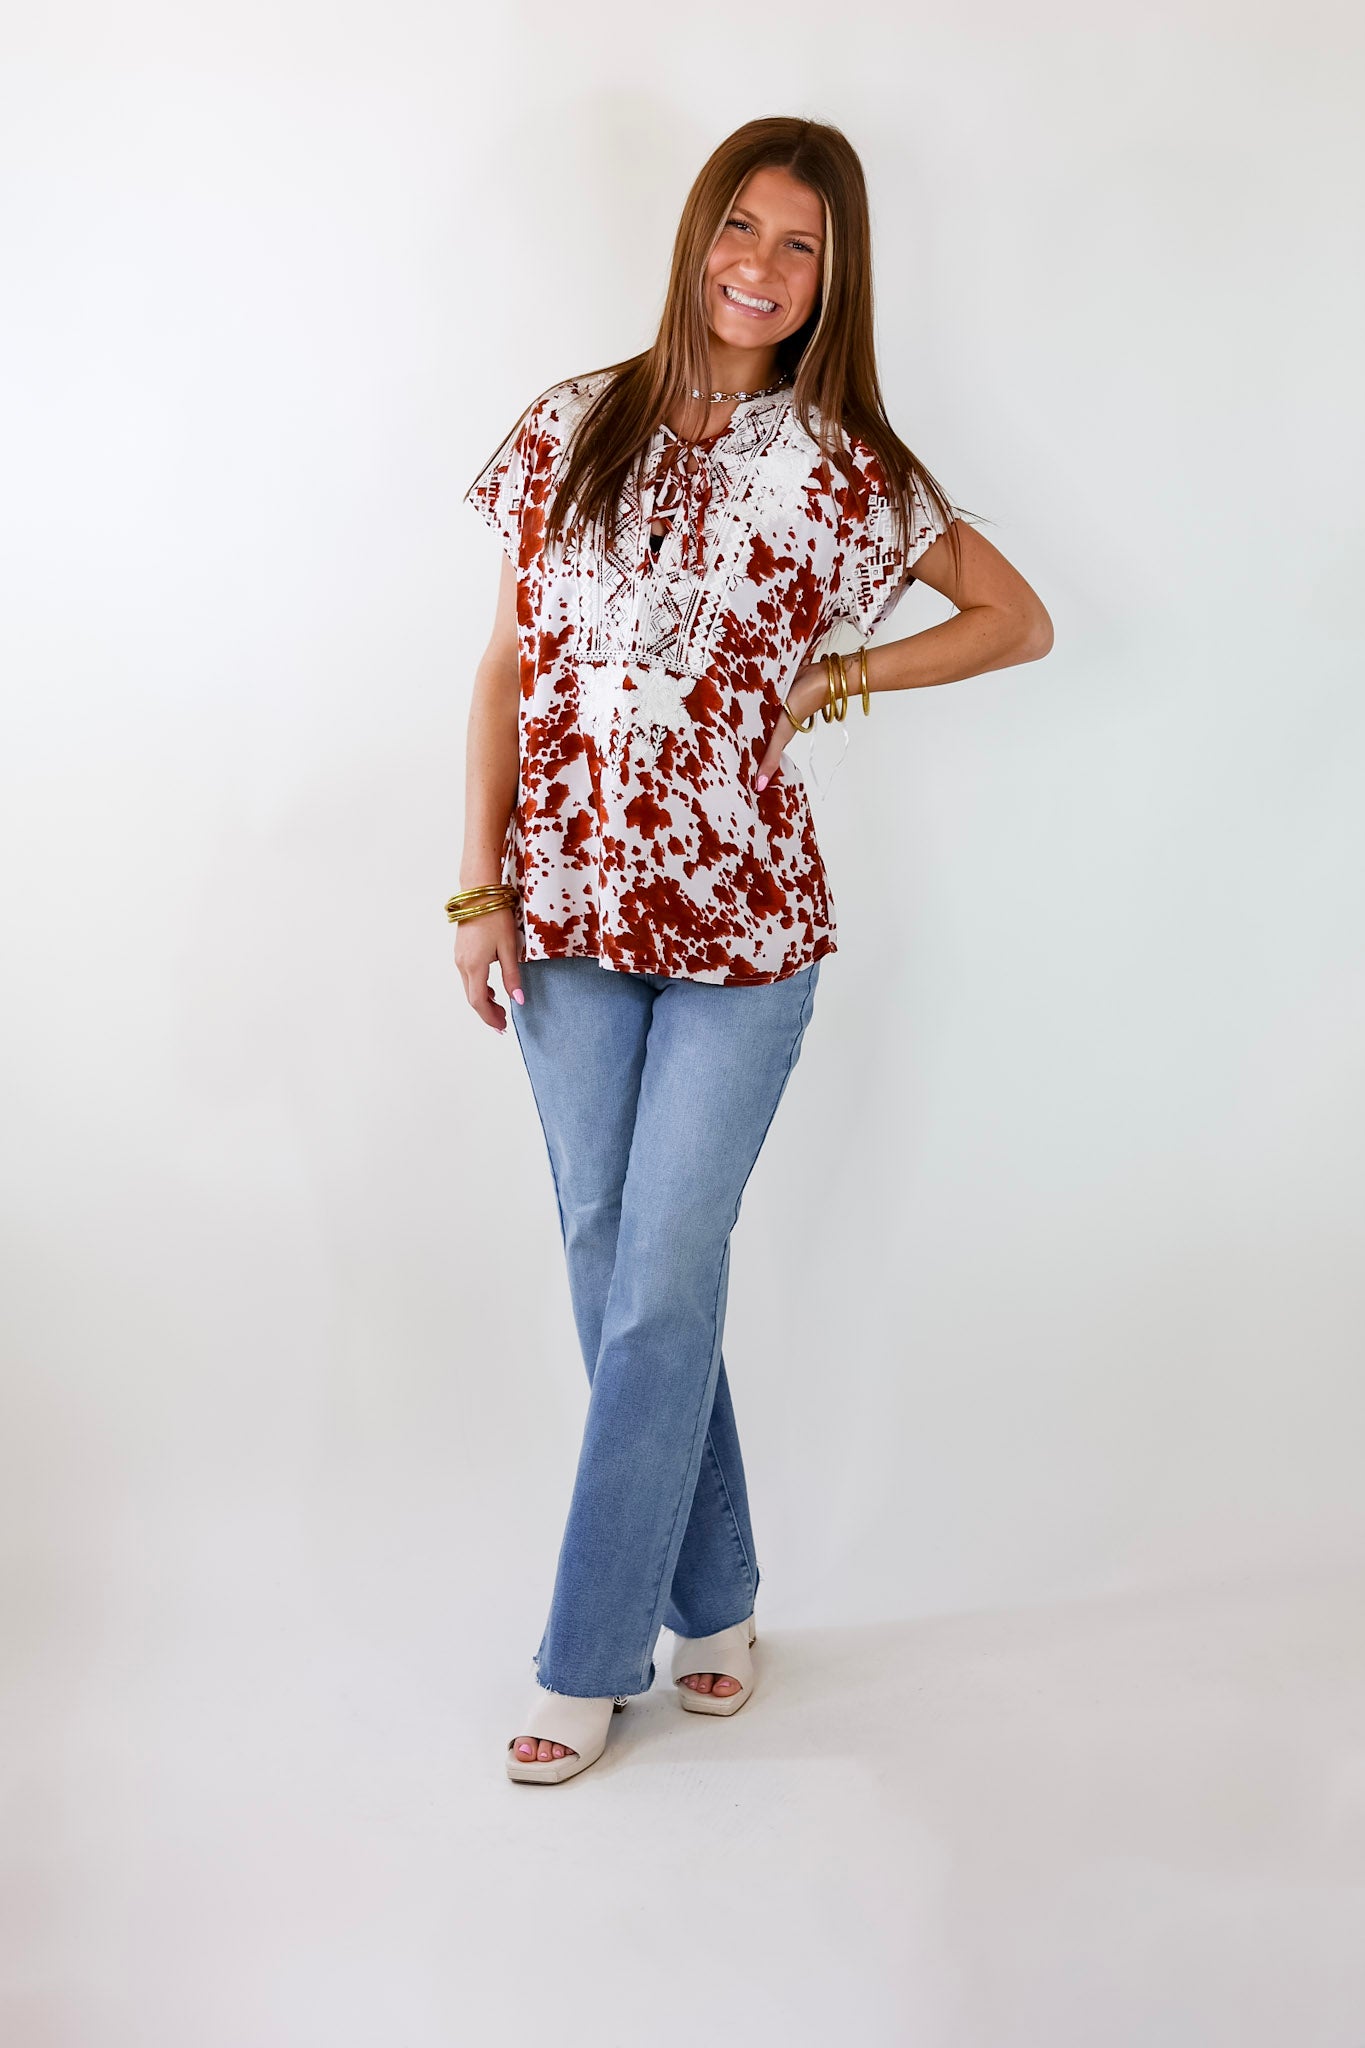 Hear The Applause Embroidered Top in White and Rust Orange - Giddy Up Glamour Boutique